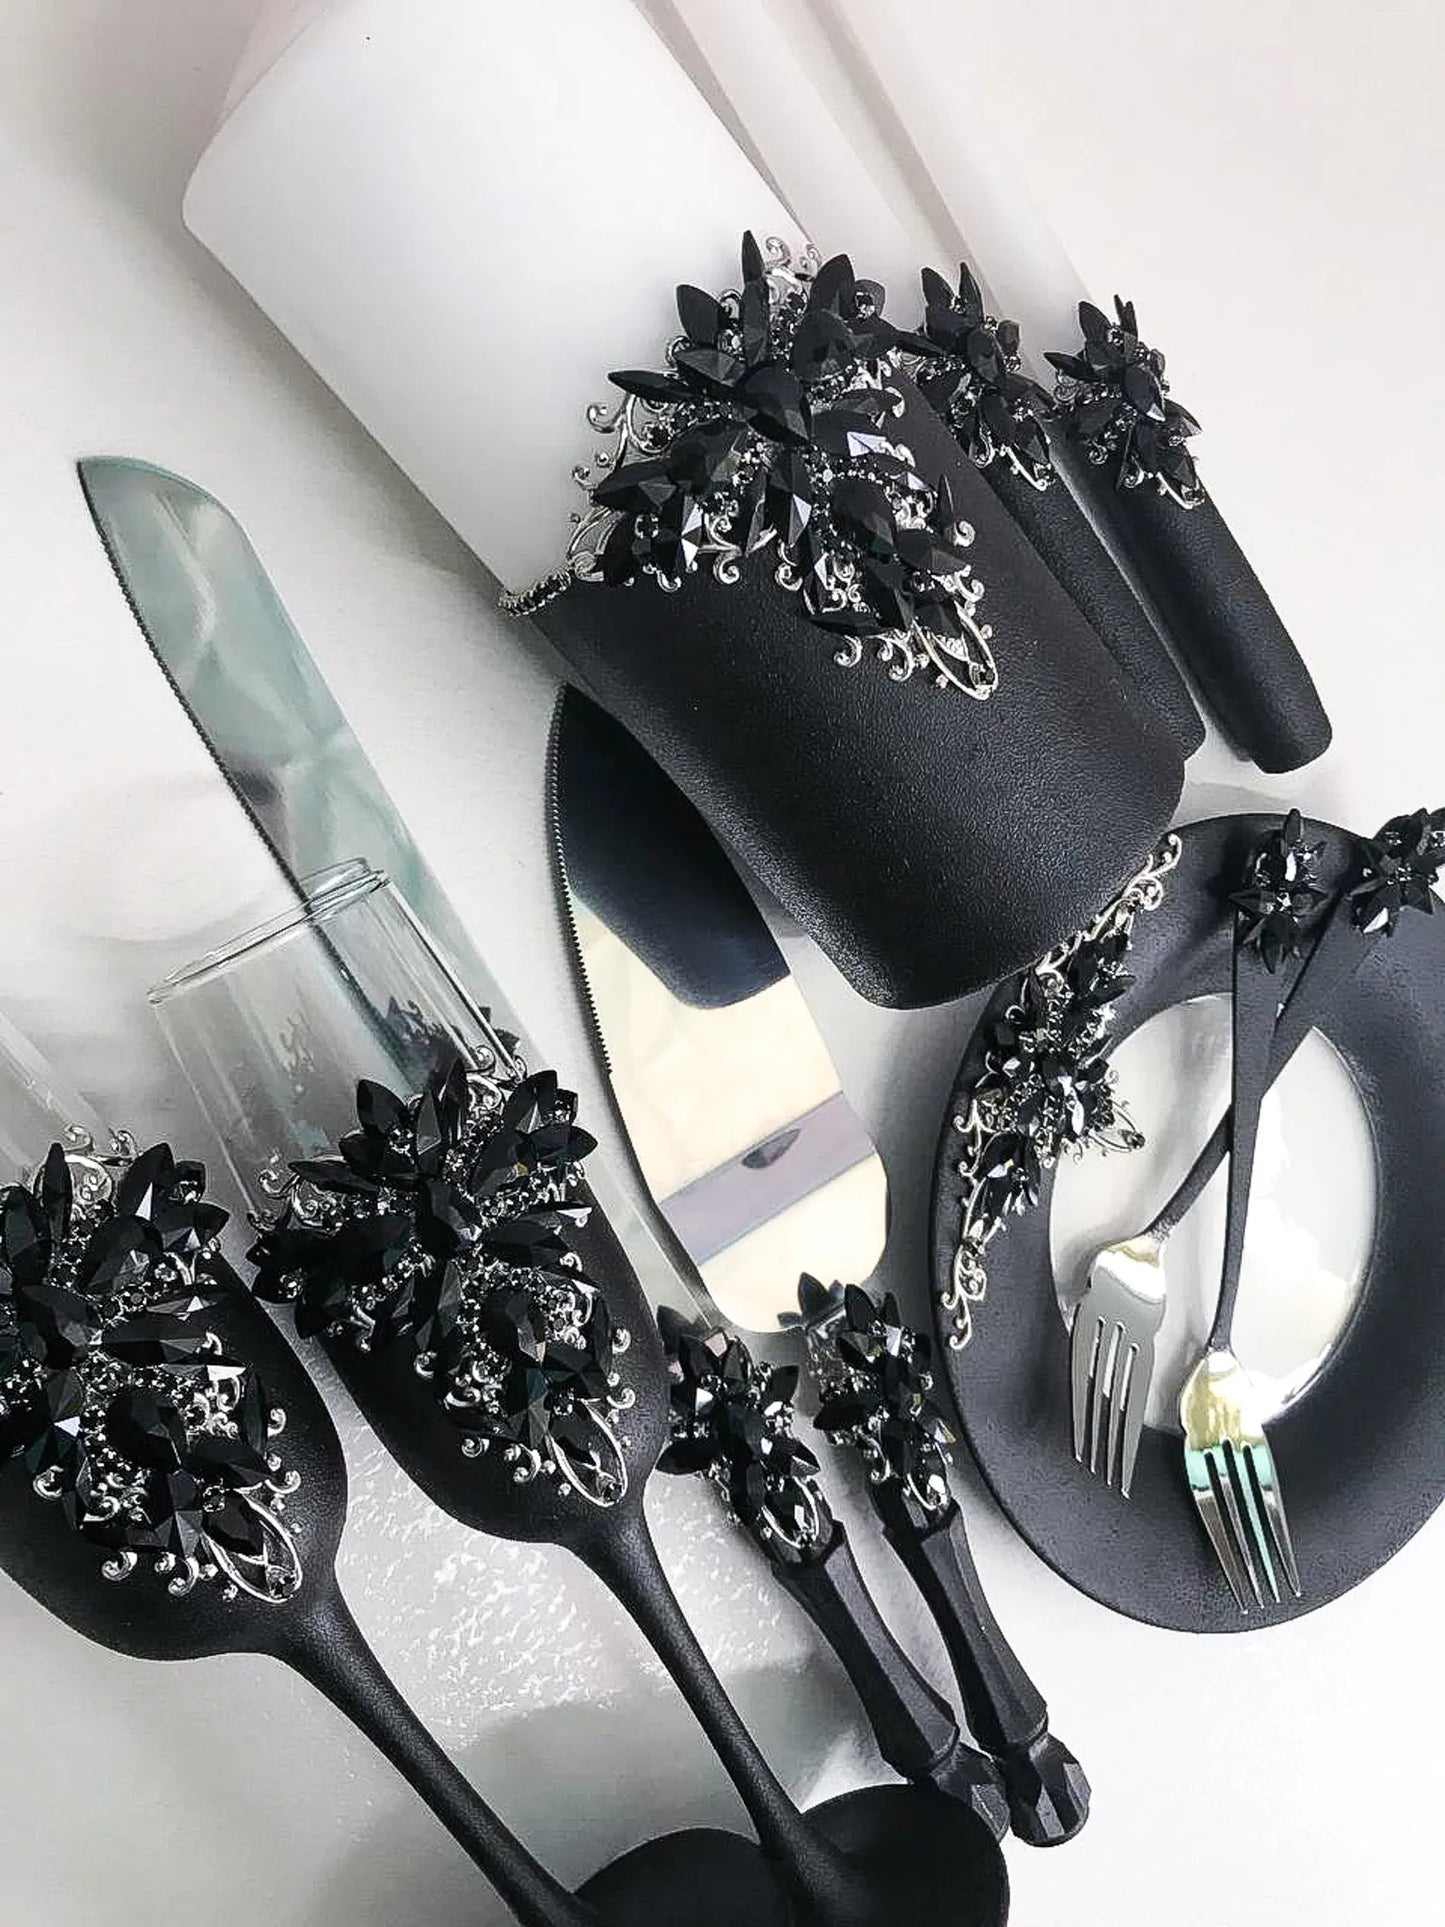 Gothic Engraved Black and Silver Crystal Mr. and Mrs. Cake Knife and Server Set